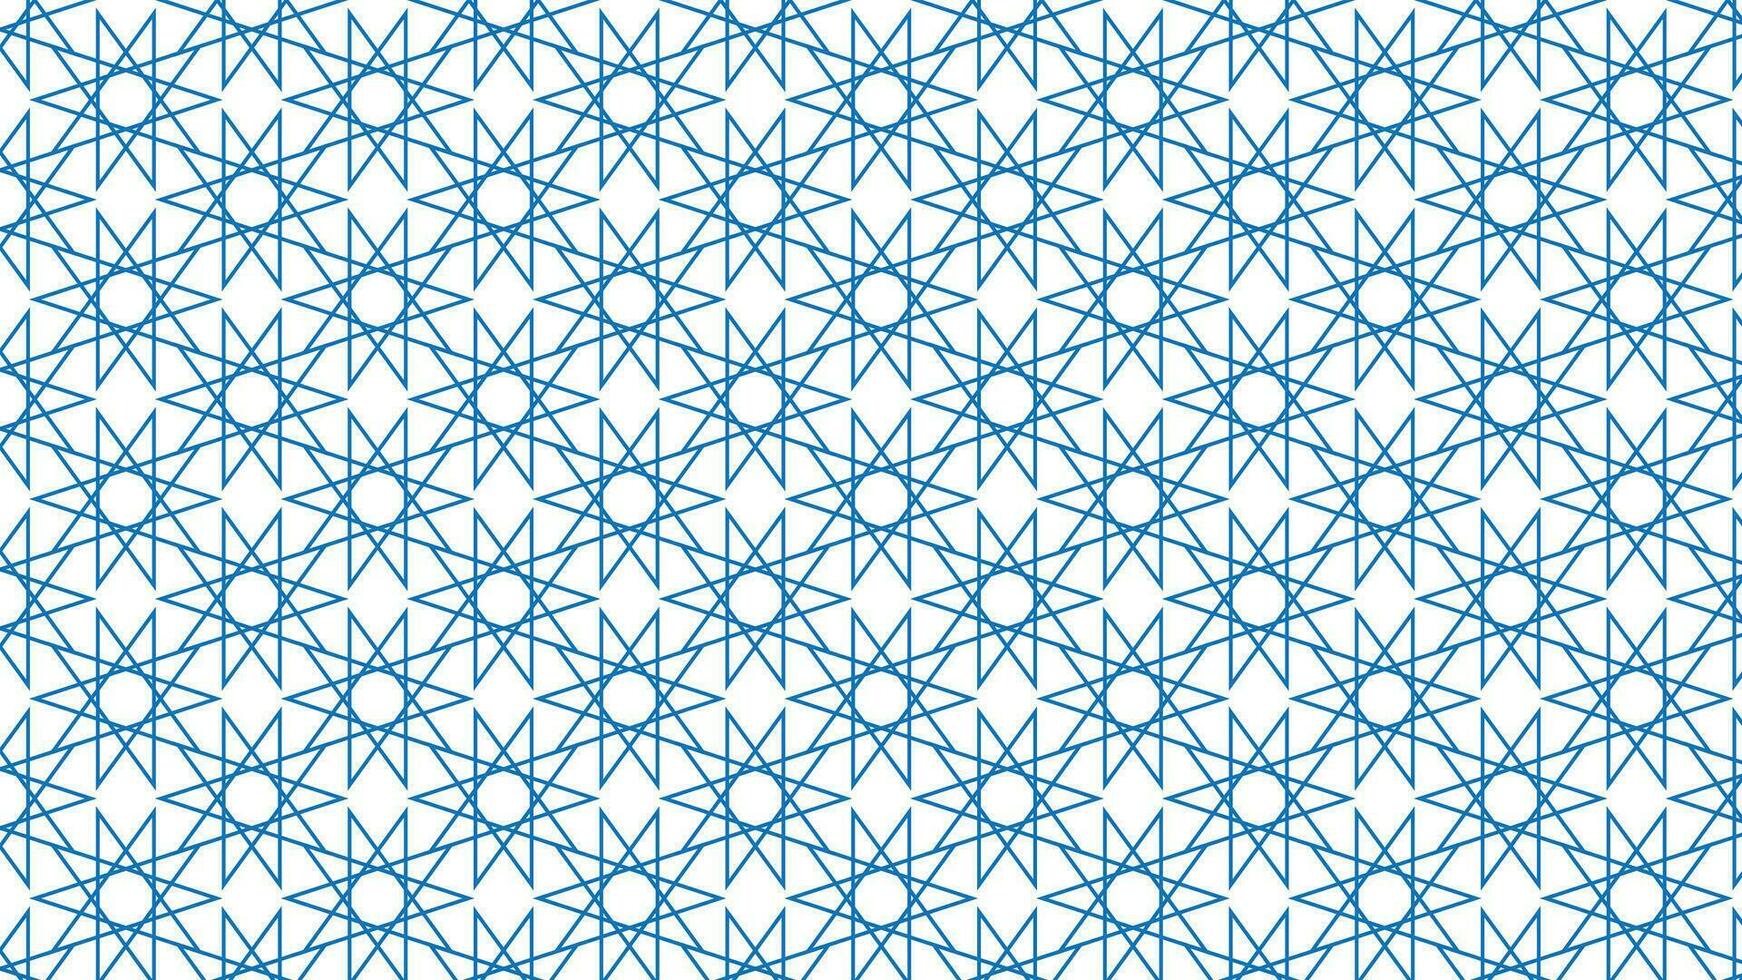 Repeating Pattern of Abstract Colorful Star and Hexagon Vector Background